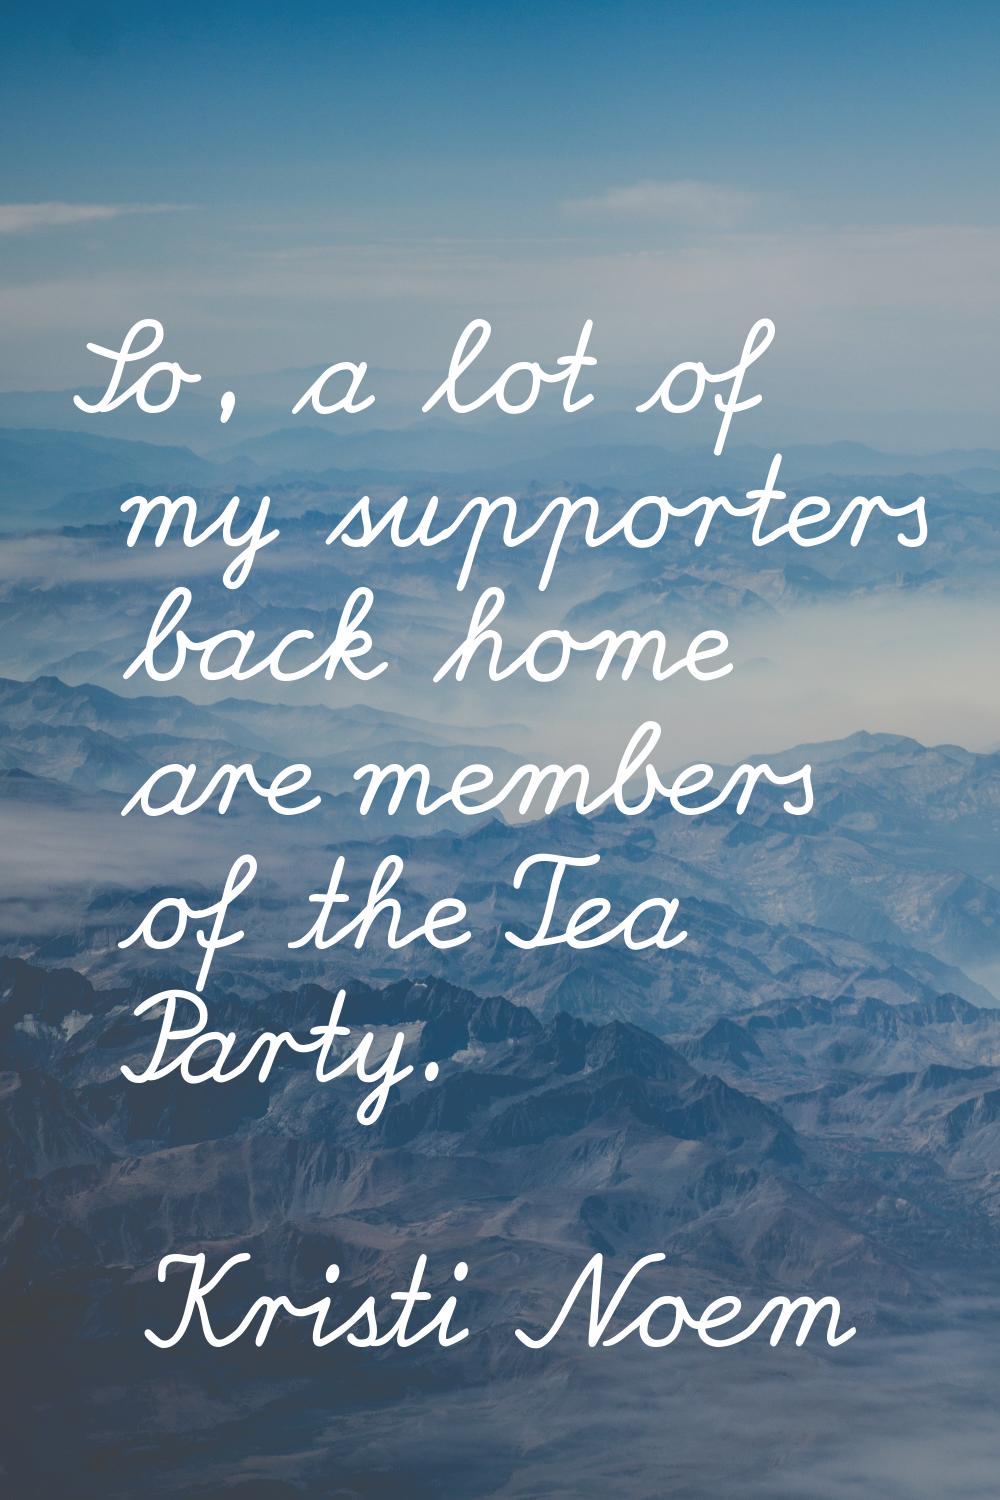 So, a lot of my supporters back home are members of the Tea Party.